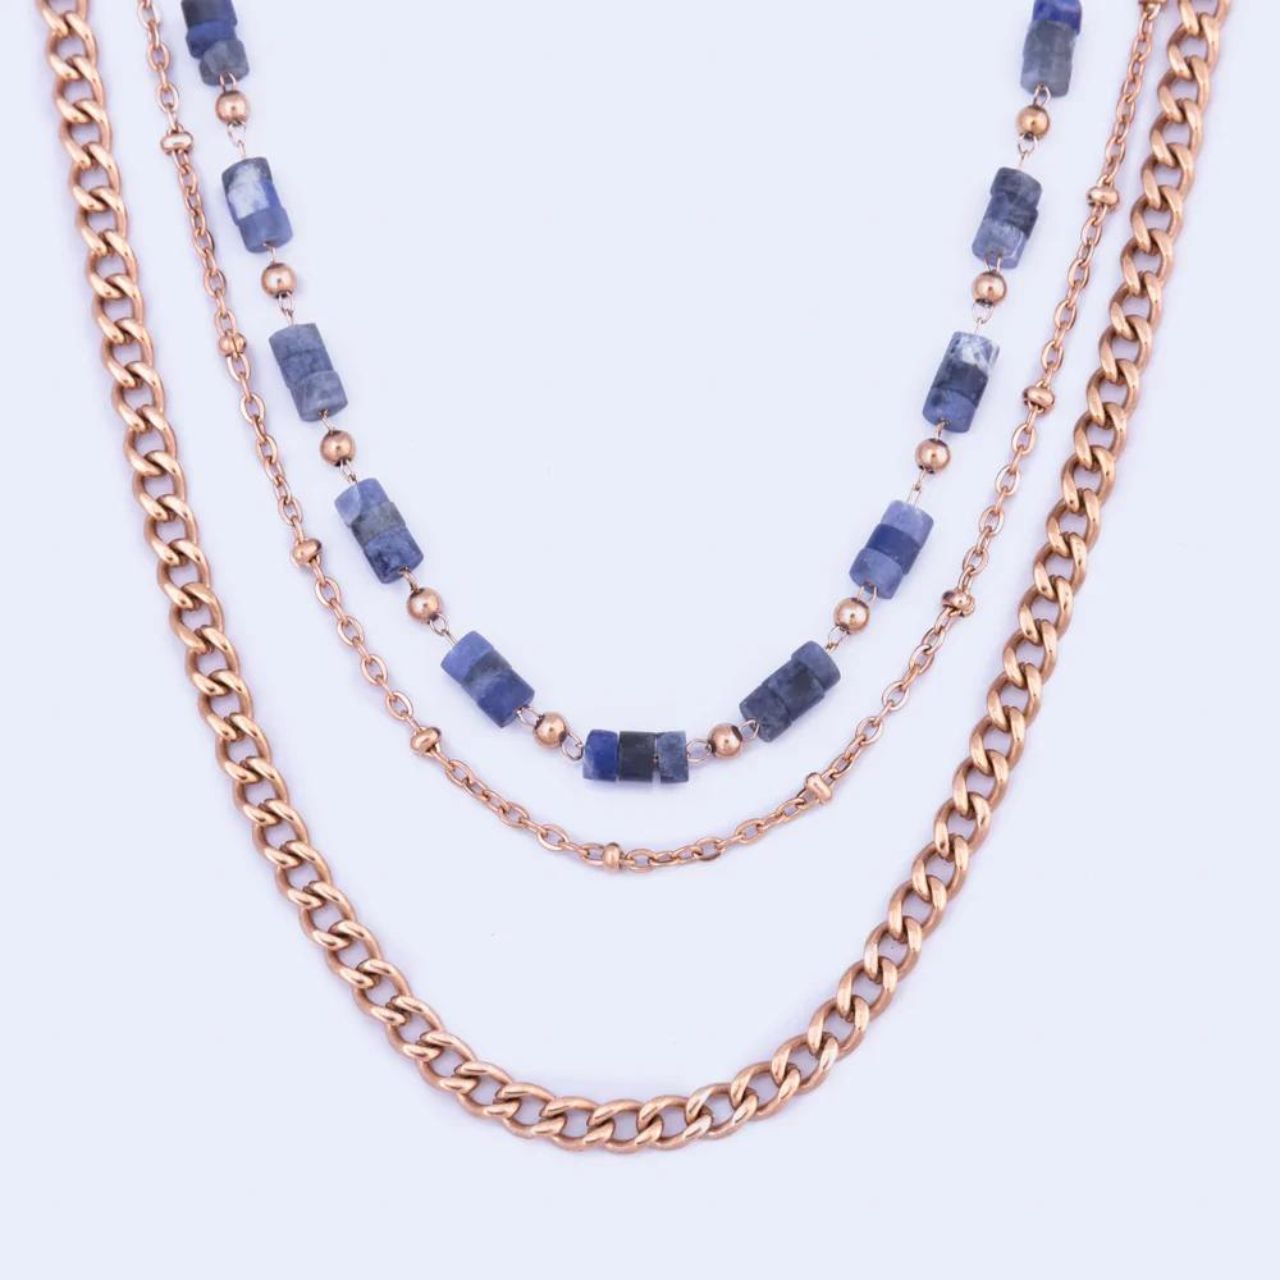 Layered Blue Sodalite Necklace by Knight & Day  Layered chain & Sodalite semi precious stone necklace.  Lengths 38/41/44 + 5cm extension. IP Rose gold plating.